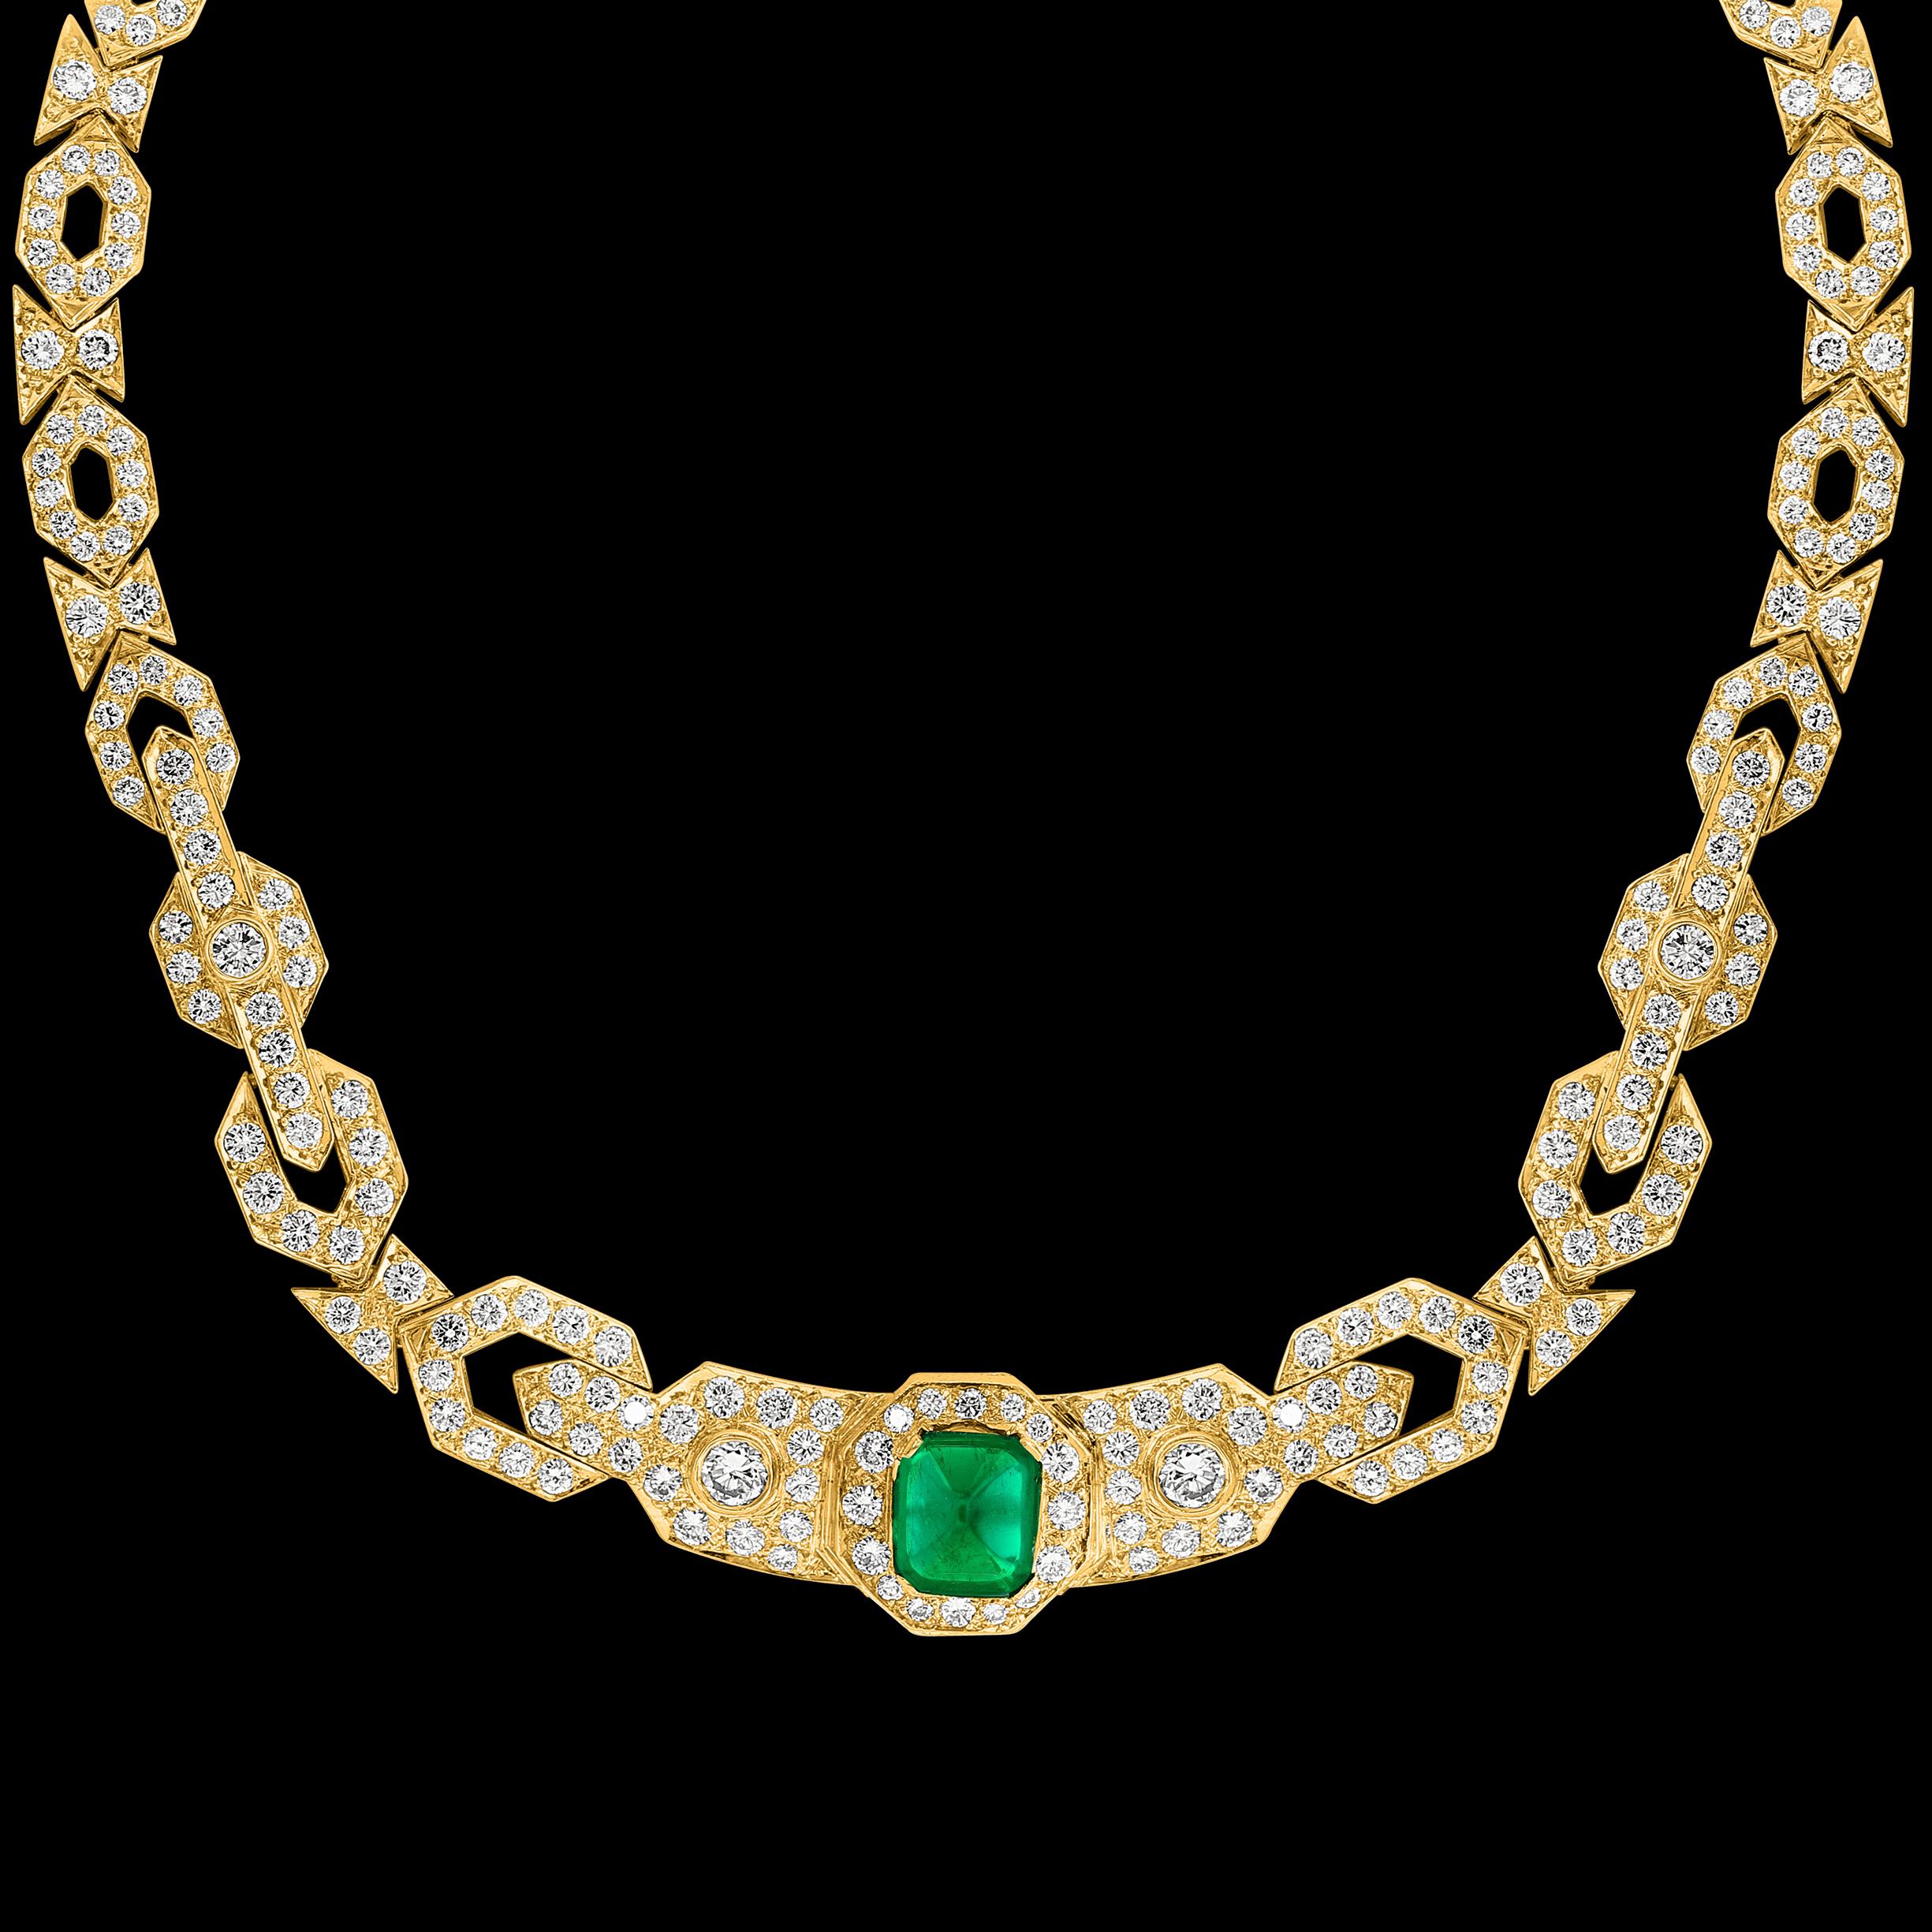 
Approximately 7 Carat  Colombian Emerald  Sugar Loaf Cabochon and 
approximately  22 Carats of Diamond Necklace, Estate with no color enhancement.
 Diamonds: approximate 22 Carat 
18 Karat Yellow Gold 75 Grams
Emerald: 7 Carat 
Measurement of the